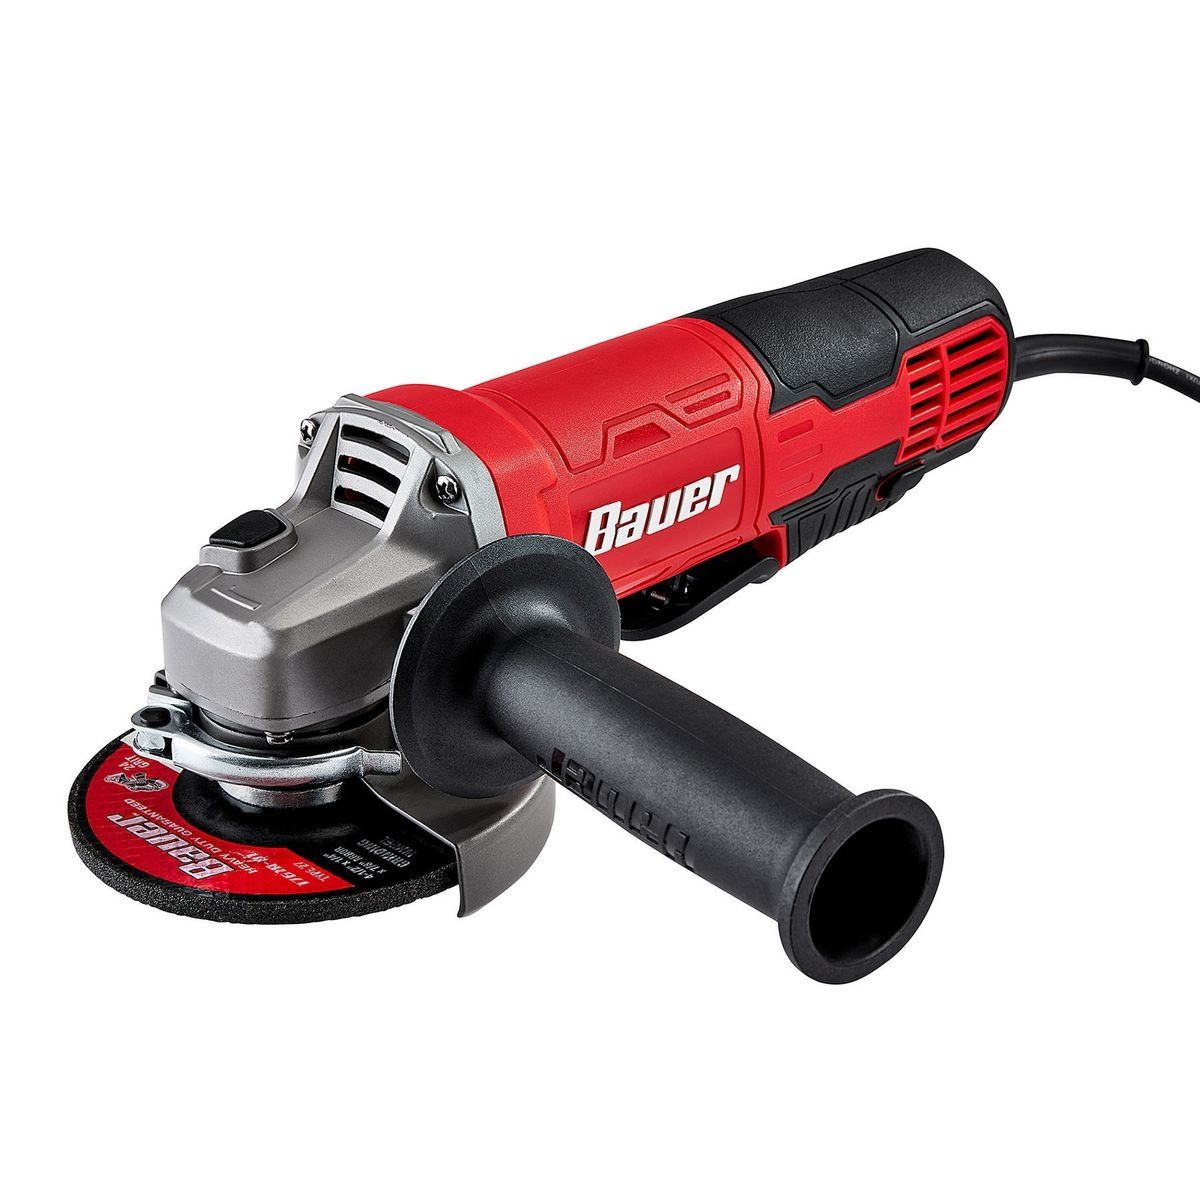 BAUER 8 Amp 4-1/2 in. Paddle Switch Angle Grinder